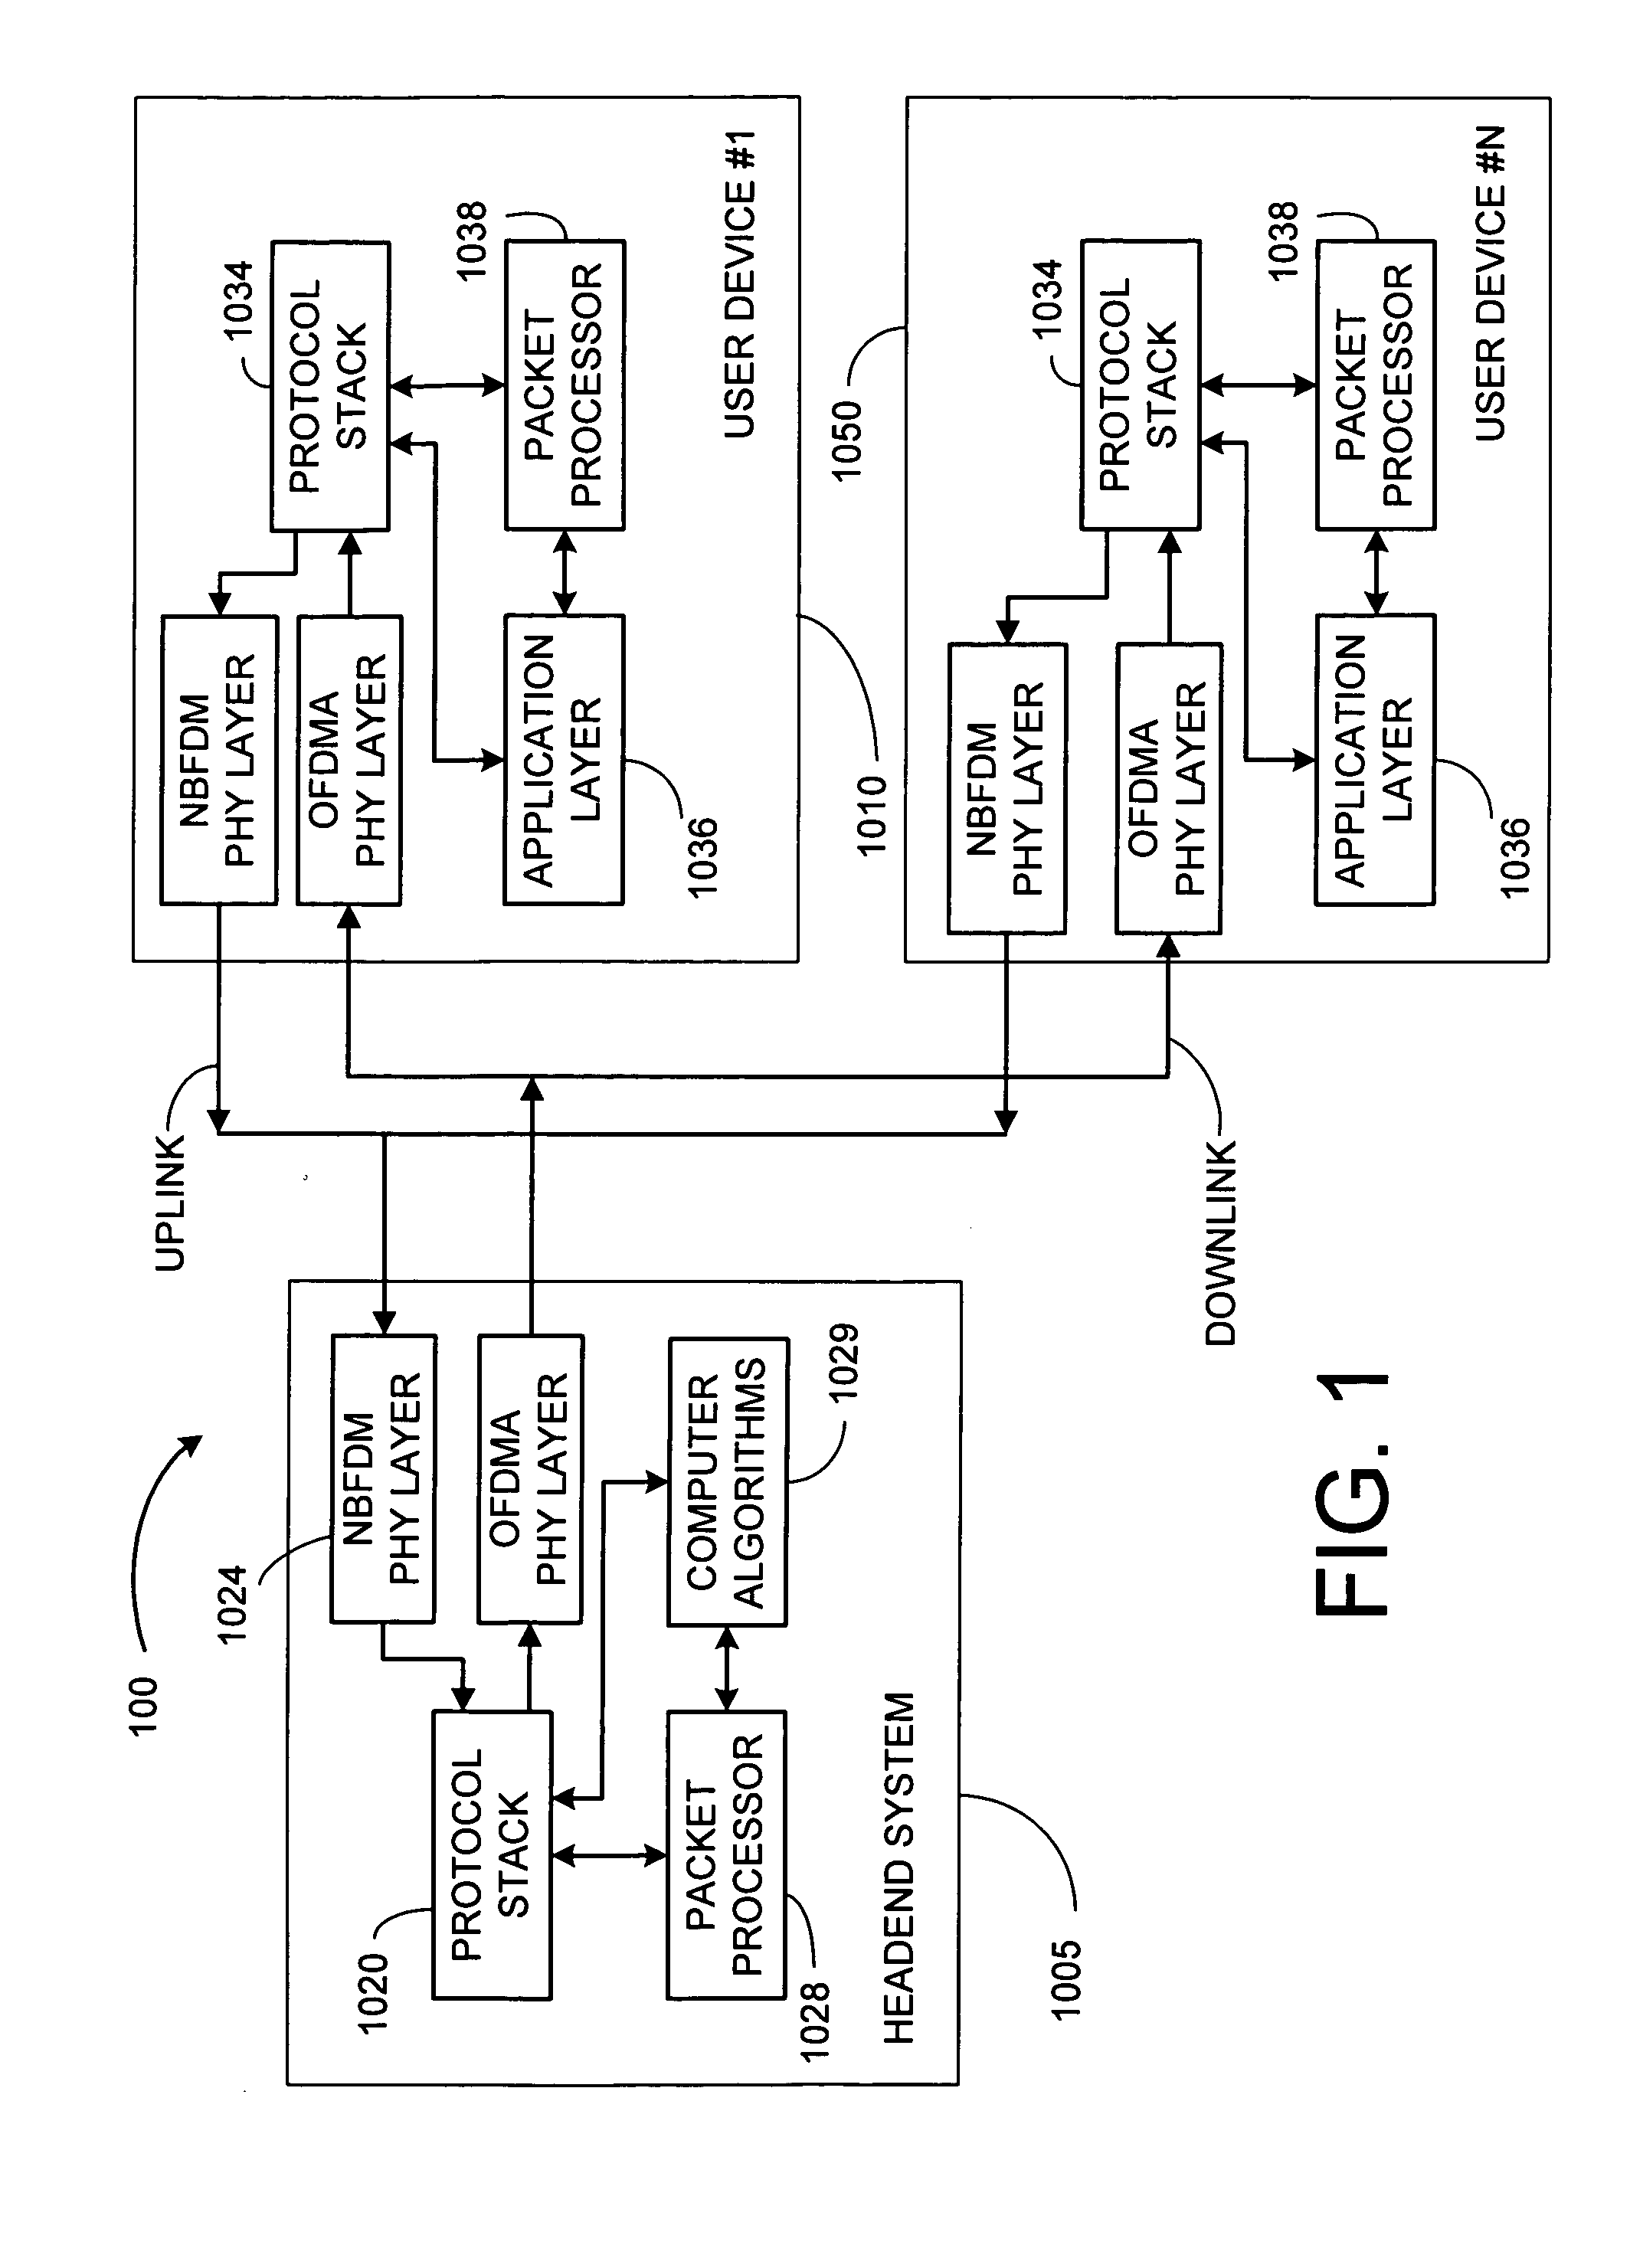 Uplink modulation and receiver structures for asymmetric OFDMA systems